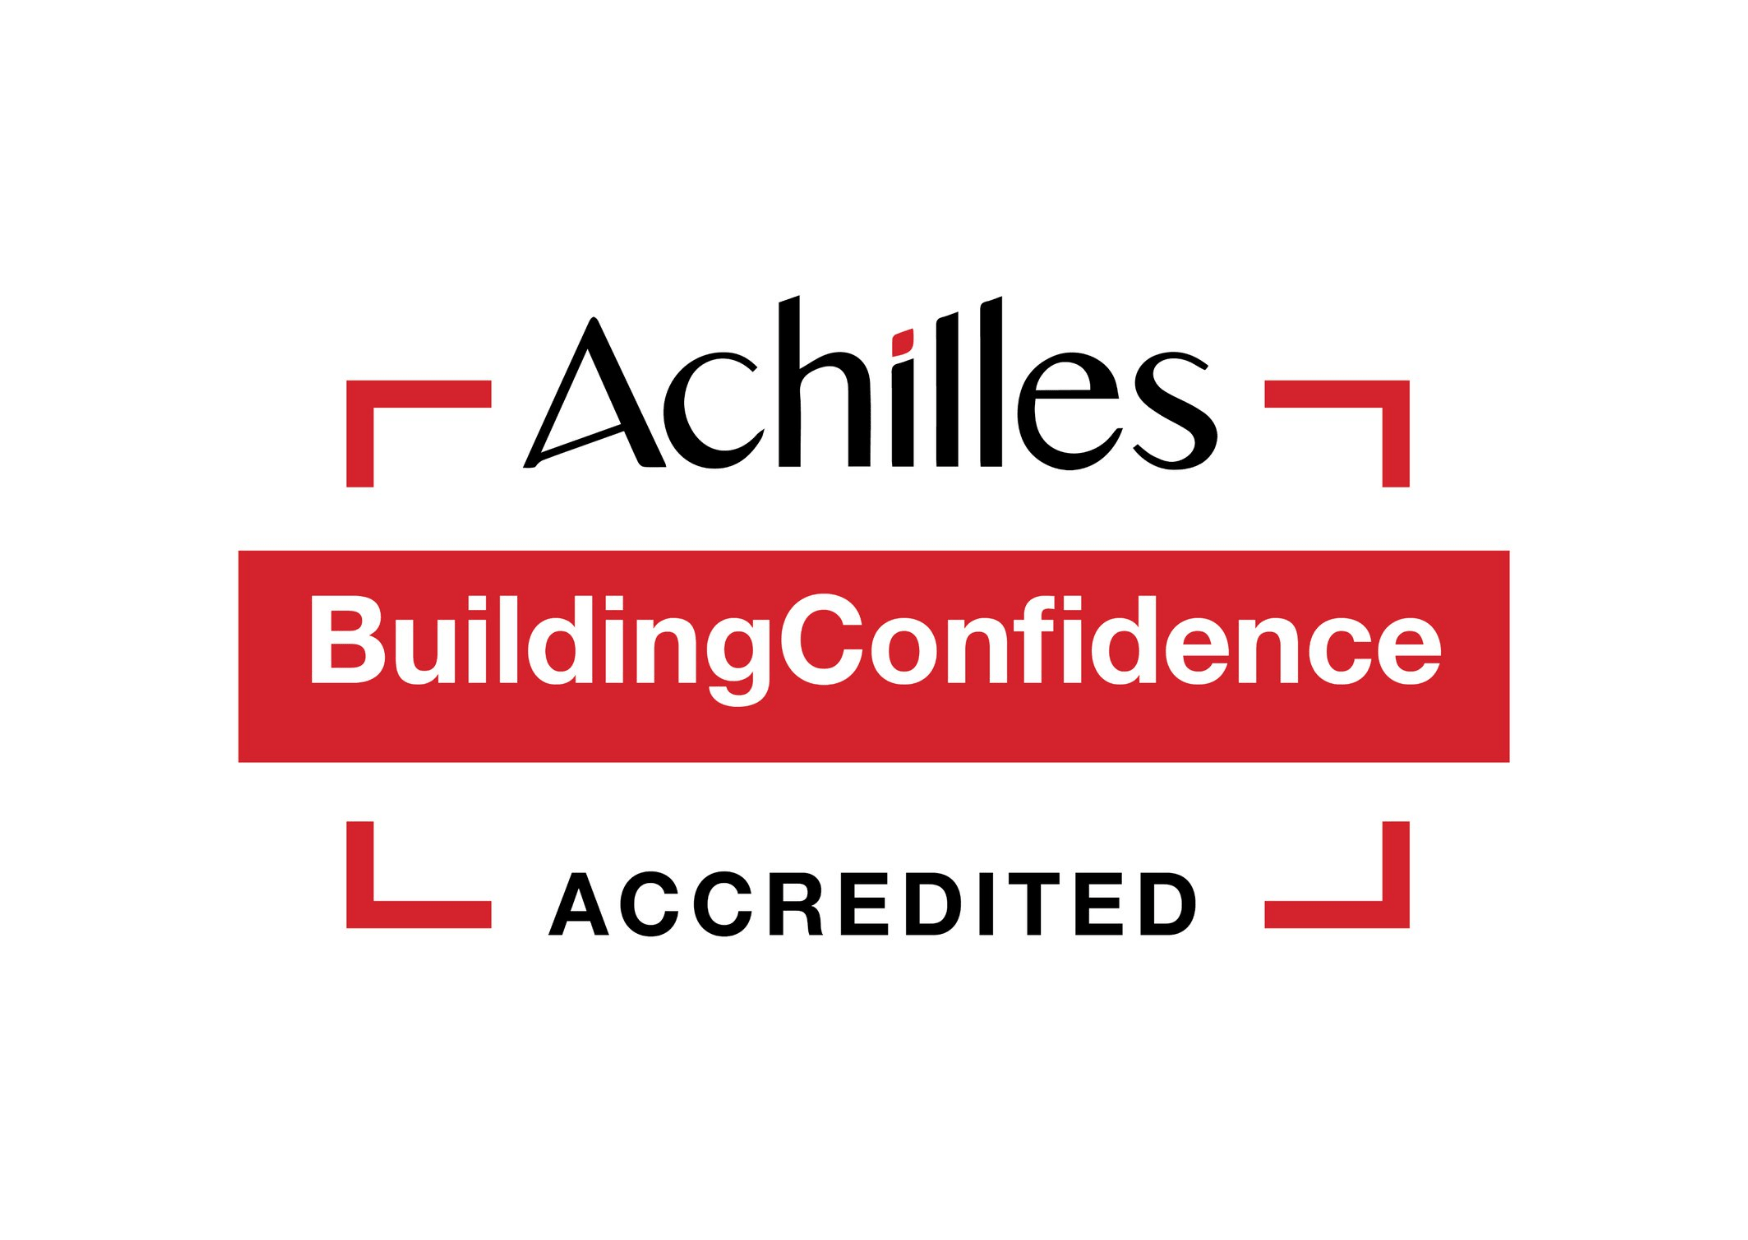 RBA - Achilles Building Confidence Accredited